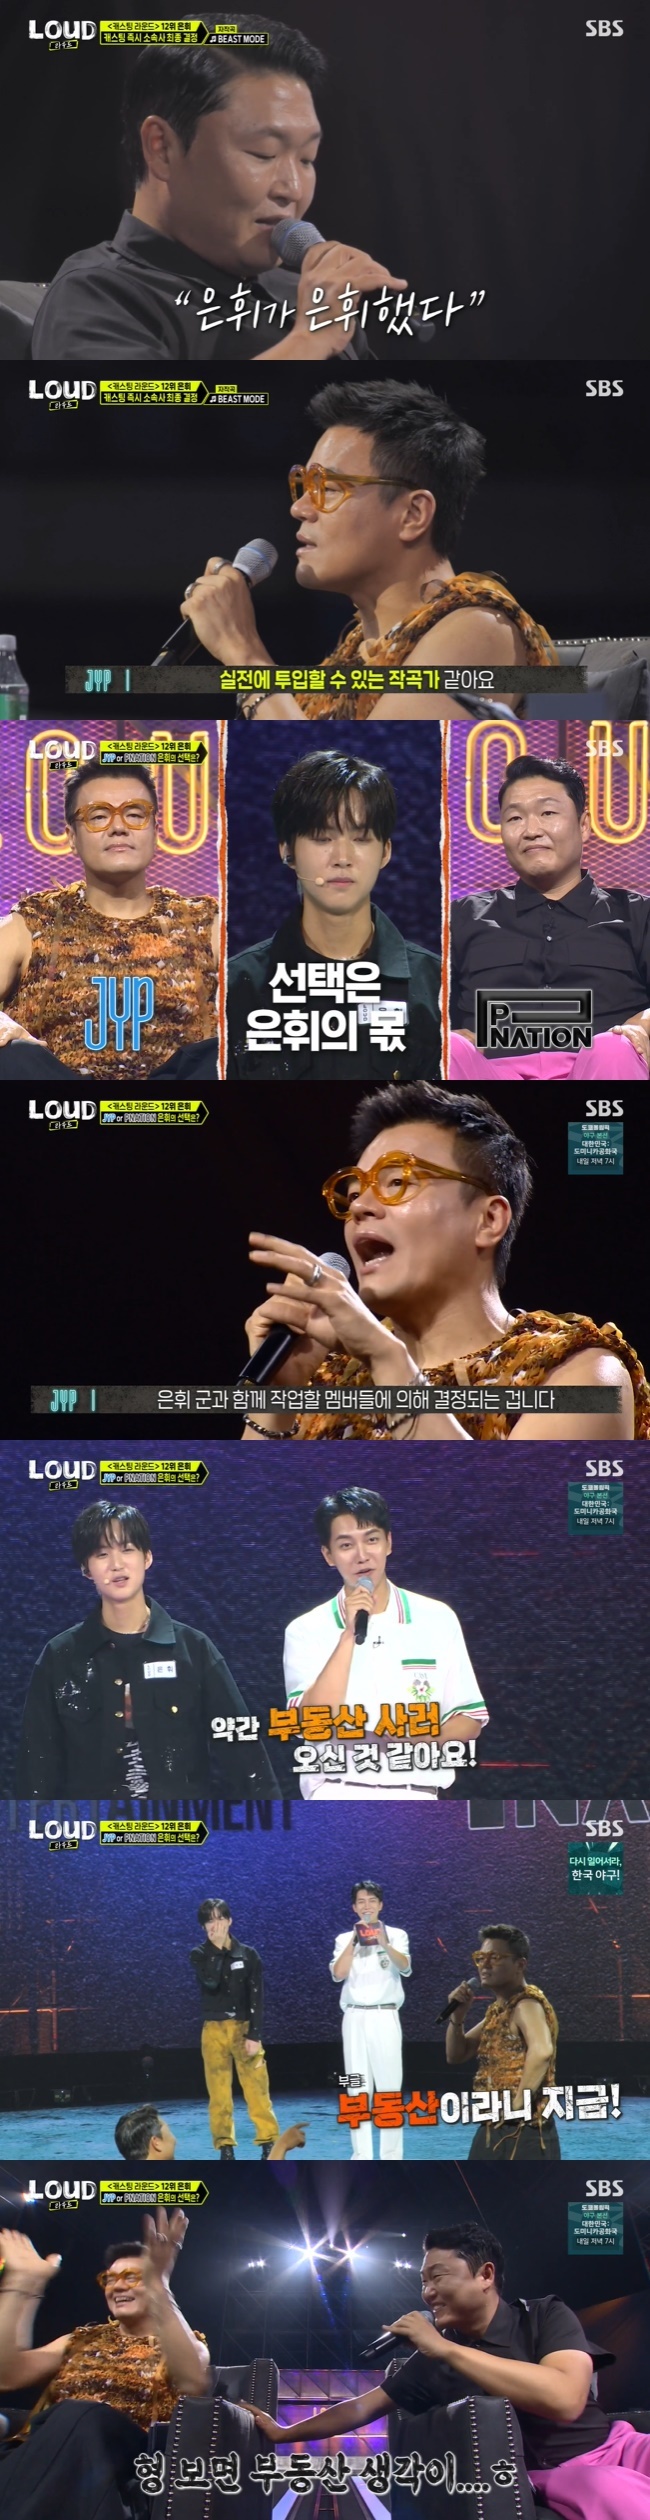 Lee Seung-gi boasted his progress with his ability to catch J. Y. Park.Lee Seung-gi appeared as a super agent on SBS Loud broadcast on July 31st.In the broadcast, Eun-hui appeared as a participant in the first group.Eun-hui, who has been praised for his compositions since he was 15 years old, presented his own song BEAST MODE, which aims to awaken for his debut.Eun-hui explained the stage by saying, The idea is now over, and my answer is this stage, referring to the question that J. Y. Park asked at the time of the JYP round, Which would you like to be an artist or an idol?Eun-hui proved his growth by trying to choreograph his own songs and choreography, and received a love call from both companies.PSY praised the silver was still in the spotlight today and praised the fact that he knew the points in a sense even in his somewhat lacking dance skills.J. Y. Park also praised Eun-hui as a composer who can put it into practice and said, The musical direction of Stray Kids is determined by three three three-letter songs.The direction of this group is determined by the members who will work with the group. Lee Seung-gi then pointed out that J. Y. Park was a little bit of a real estate purchase from the close. J. Y. Park said, Is this important at the moment?I was nervous because I was close to the Chancellor (PSY). I want you to do it right. Real estate. Eun-hui asked PSY which group he was pursuing, and PSY said, I want to create a K-pop group for a slightly different generation than to be like a group that exists.Lee Seung-gi then asked if he could give me a speaker in my pinion workshop, which Eun-hwi coveted.